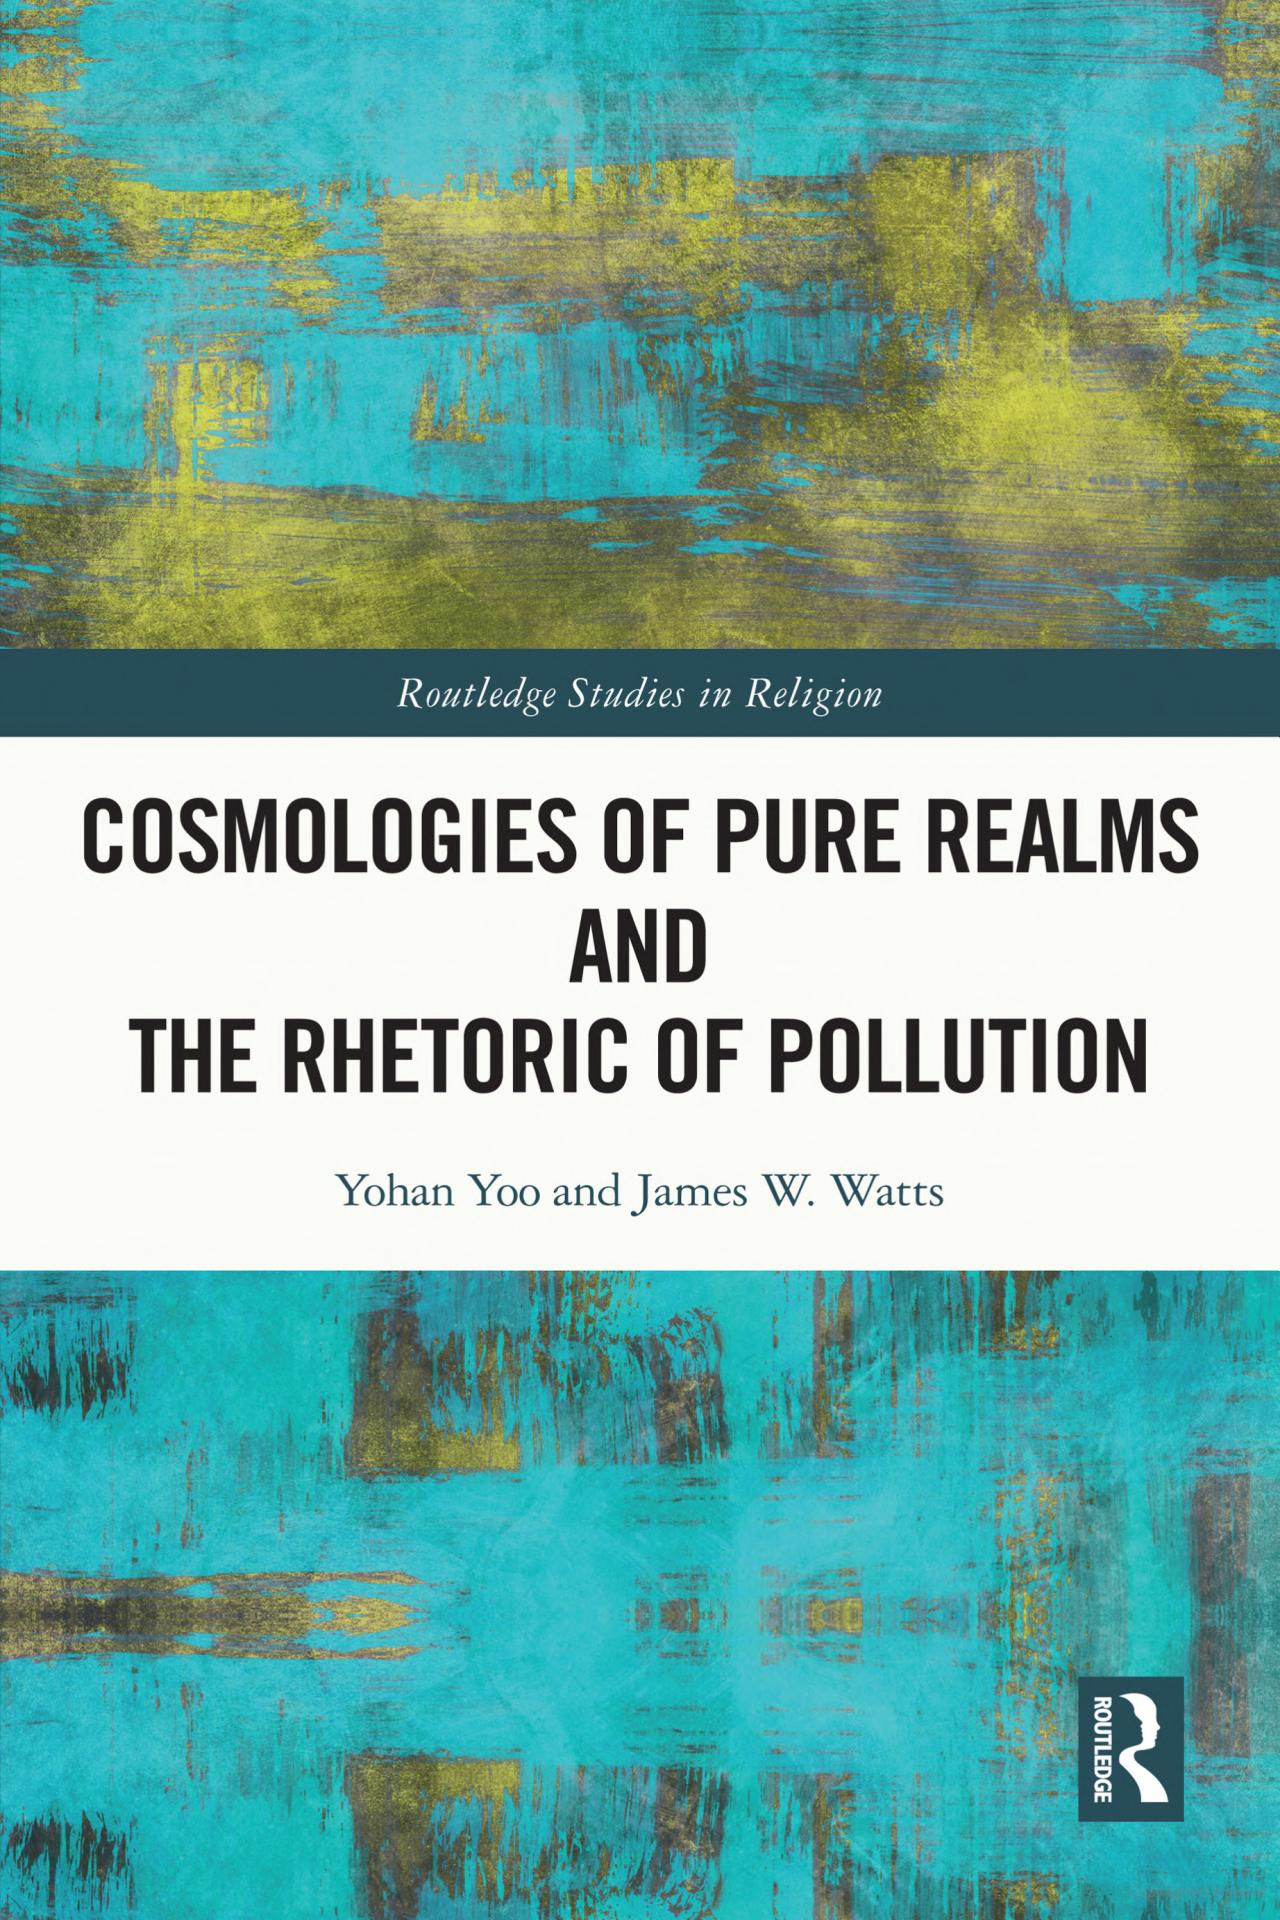 Cosmologies of Pure Realms 2021